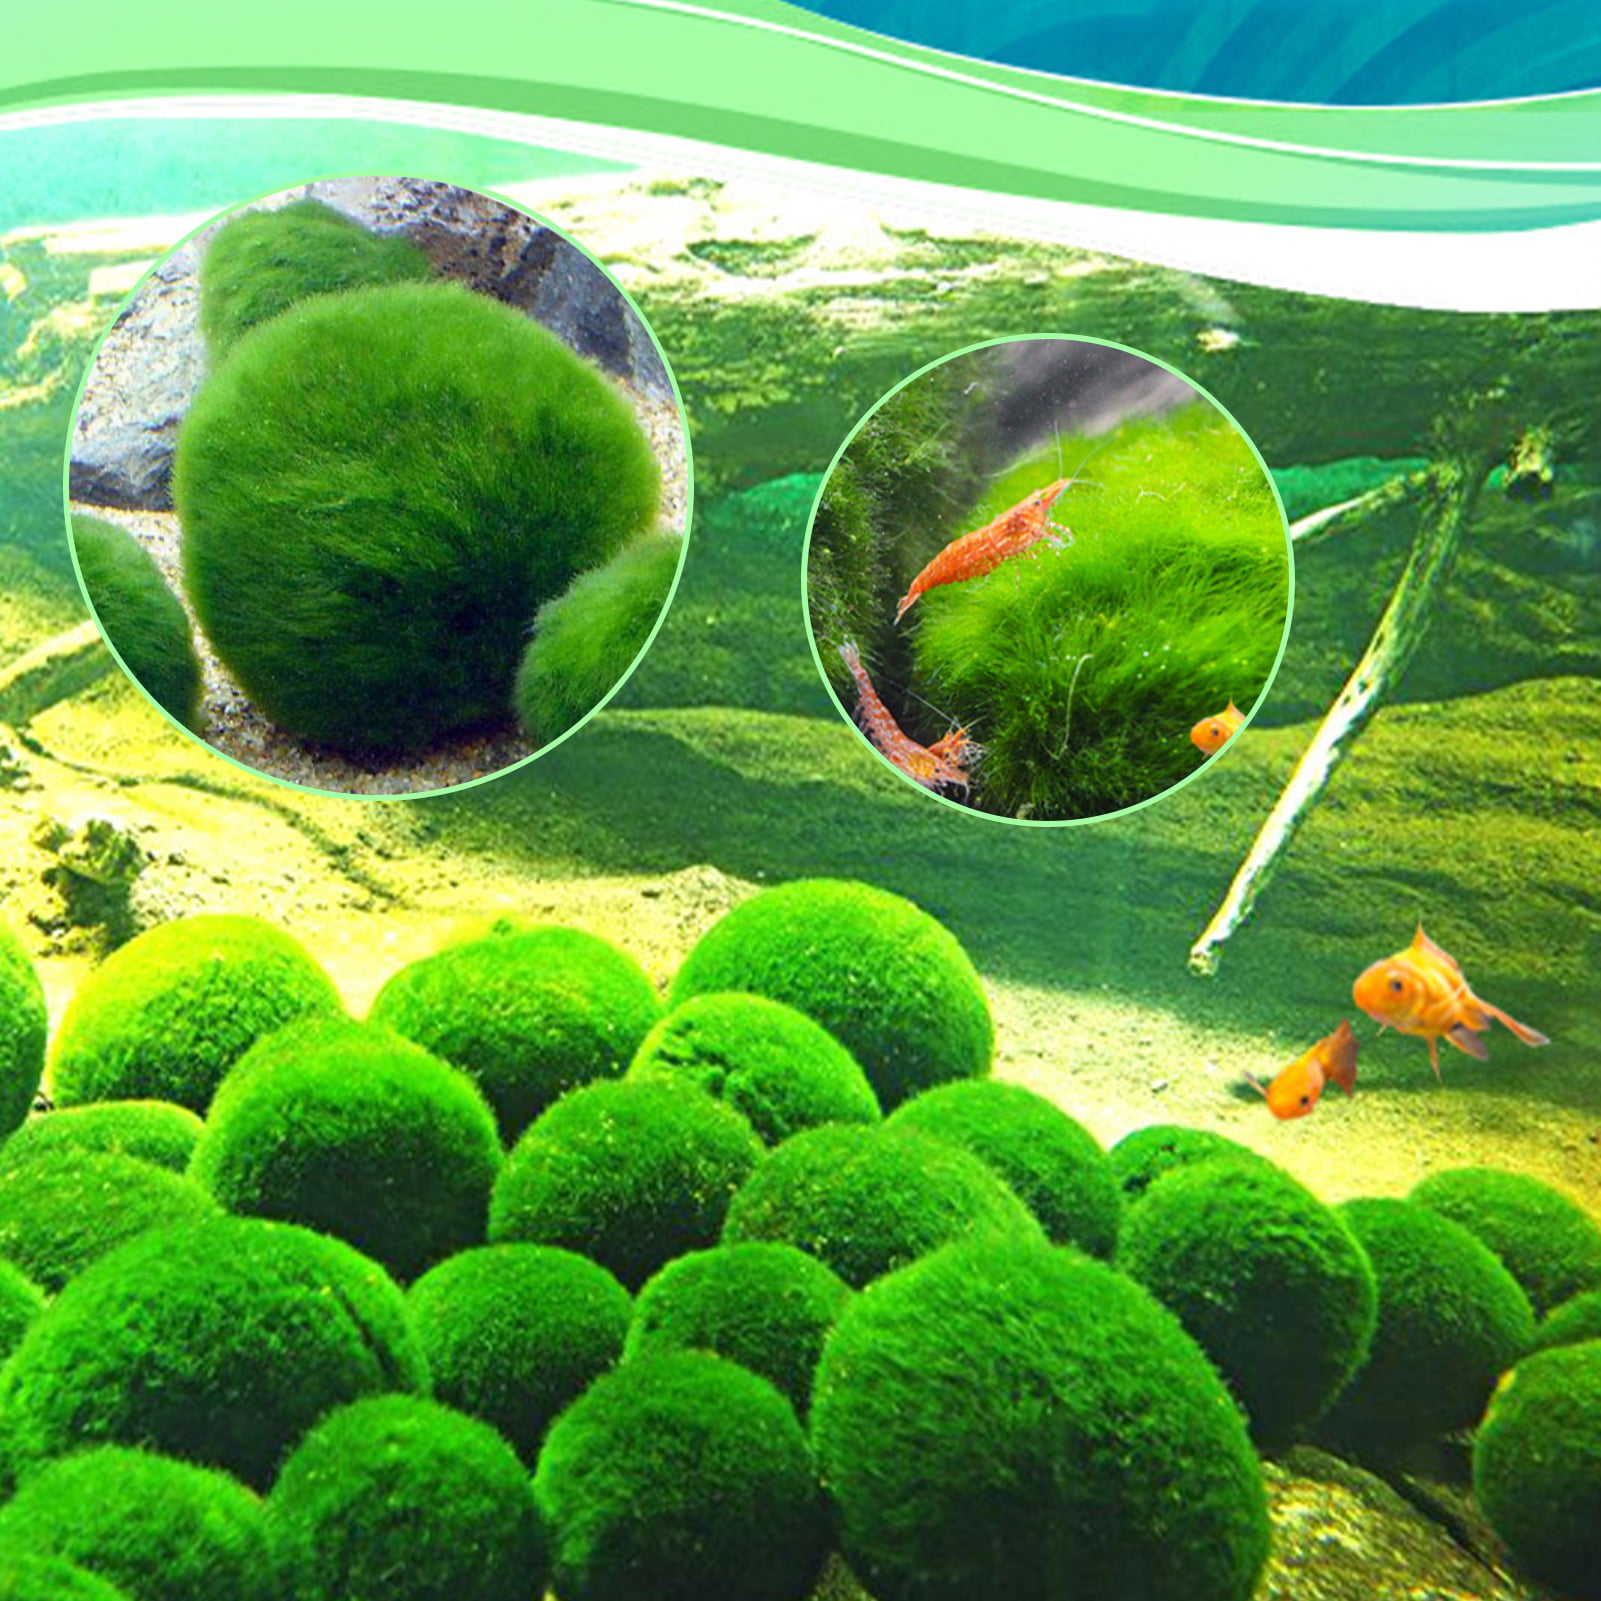 The Beginner's Guide to Caring for Marimo Moss Balls – Aquarium Plants  Factory